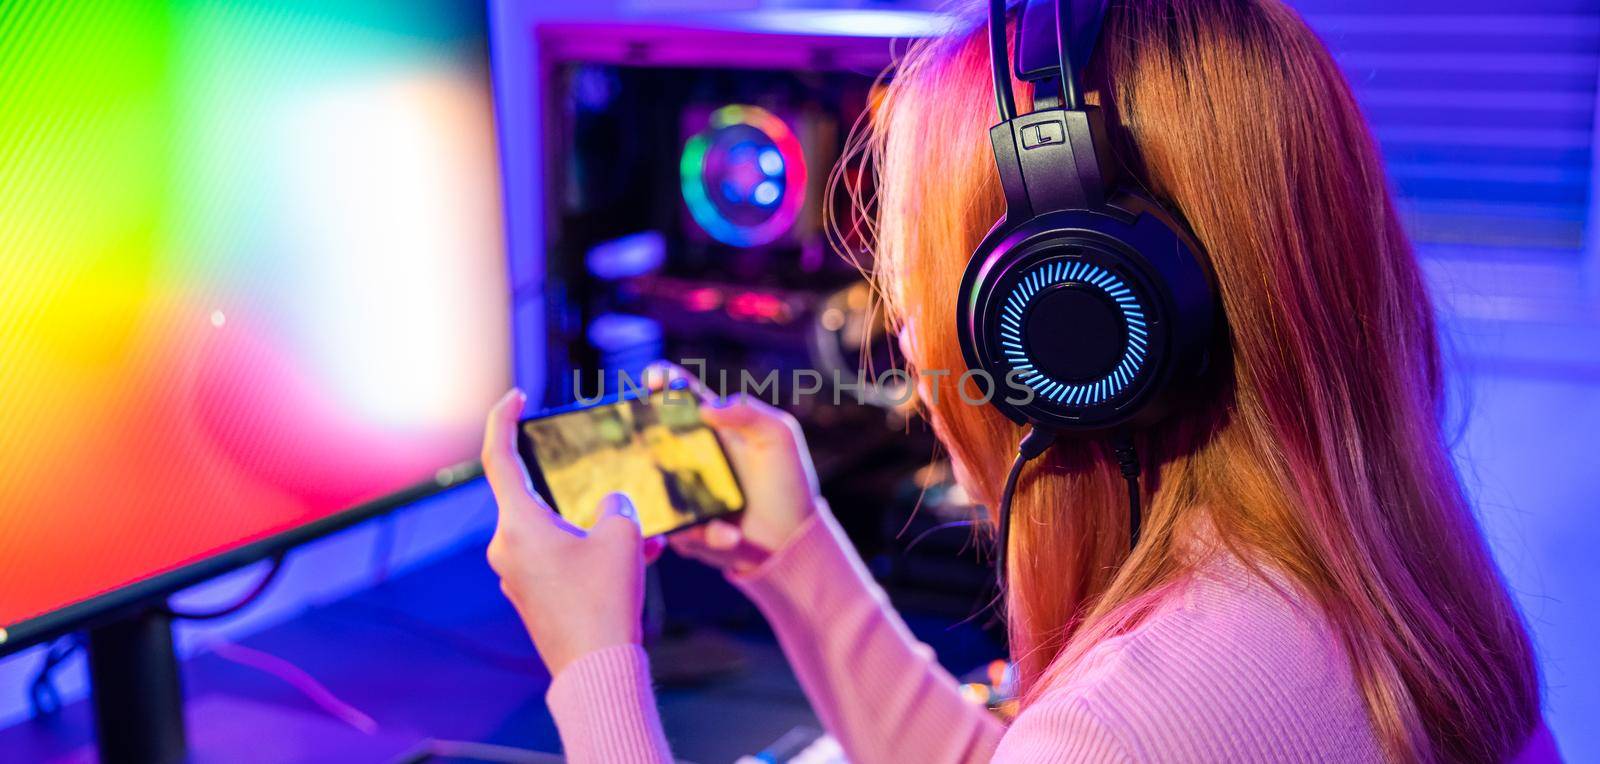 Asian woman live stream she play video game via smartphone at home neon lights living room by Sorapop